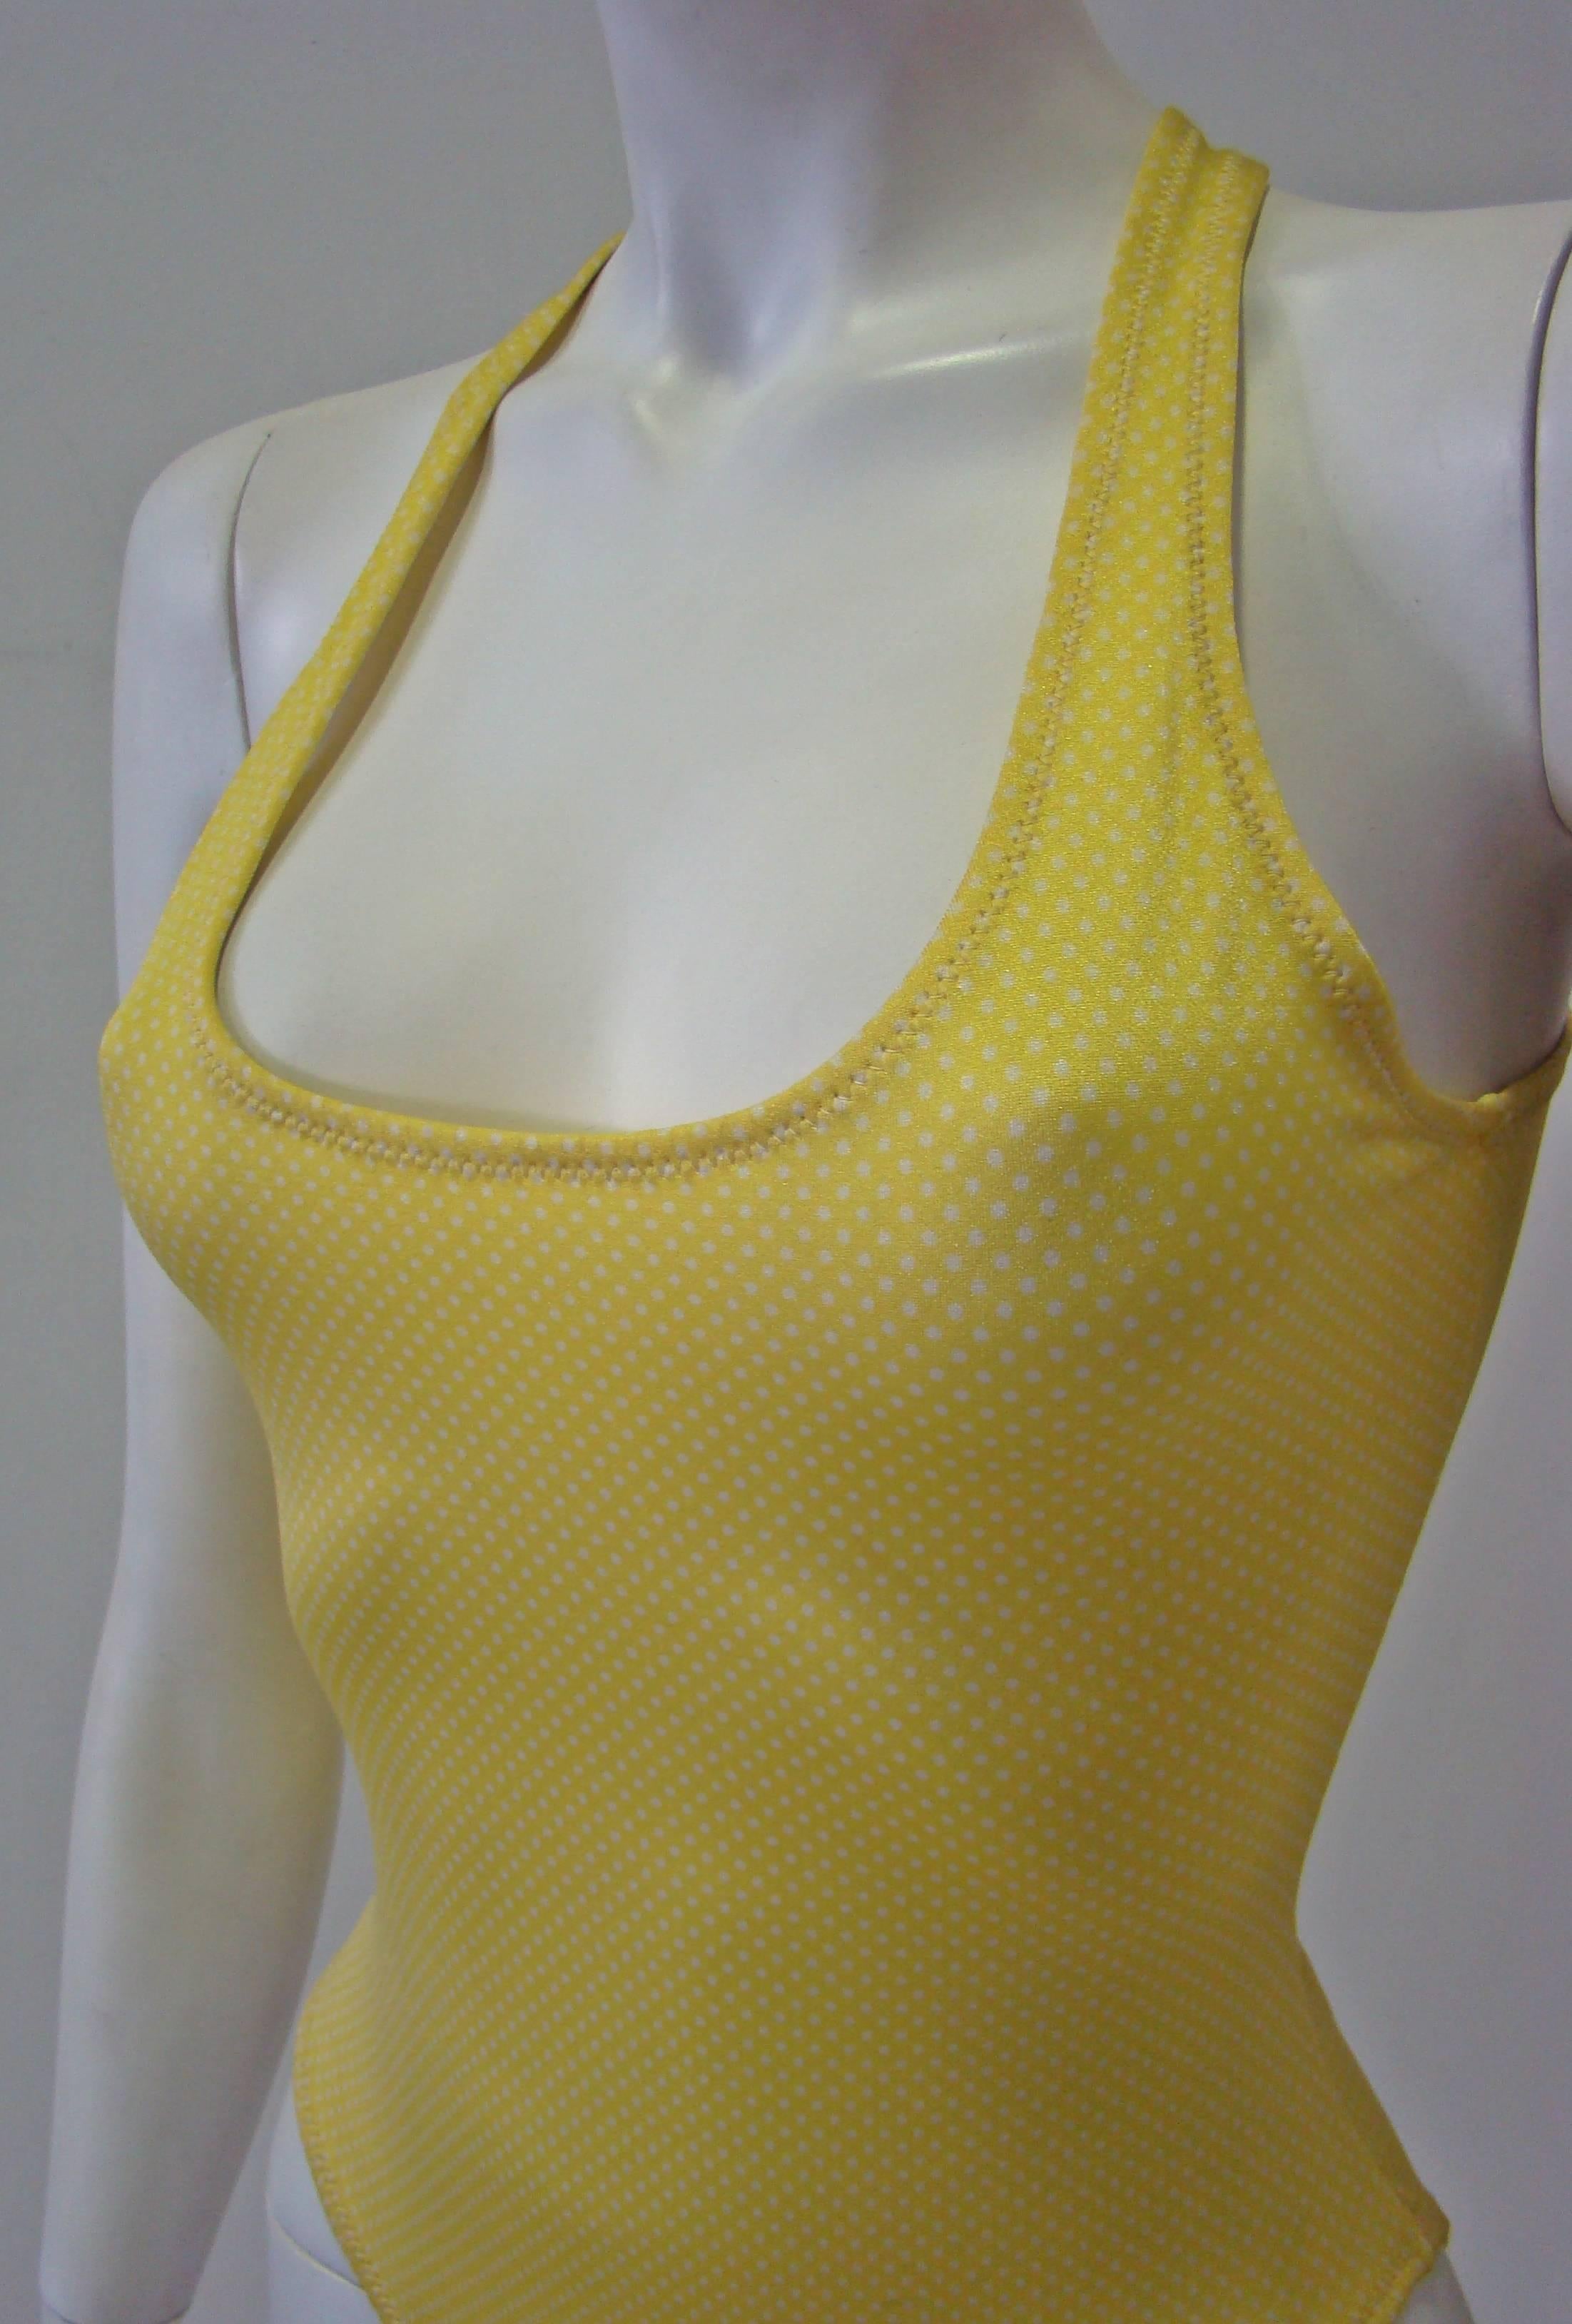 Brown Gianni Versace Mare Lemon Bathing Suit With White Polka Dots For Sale